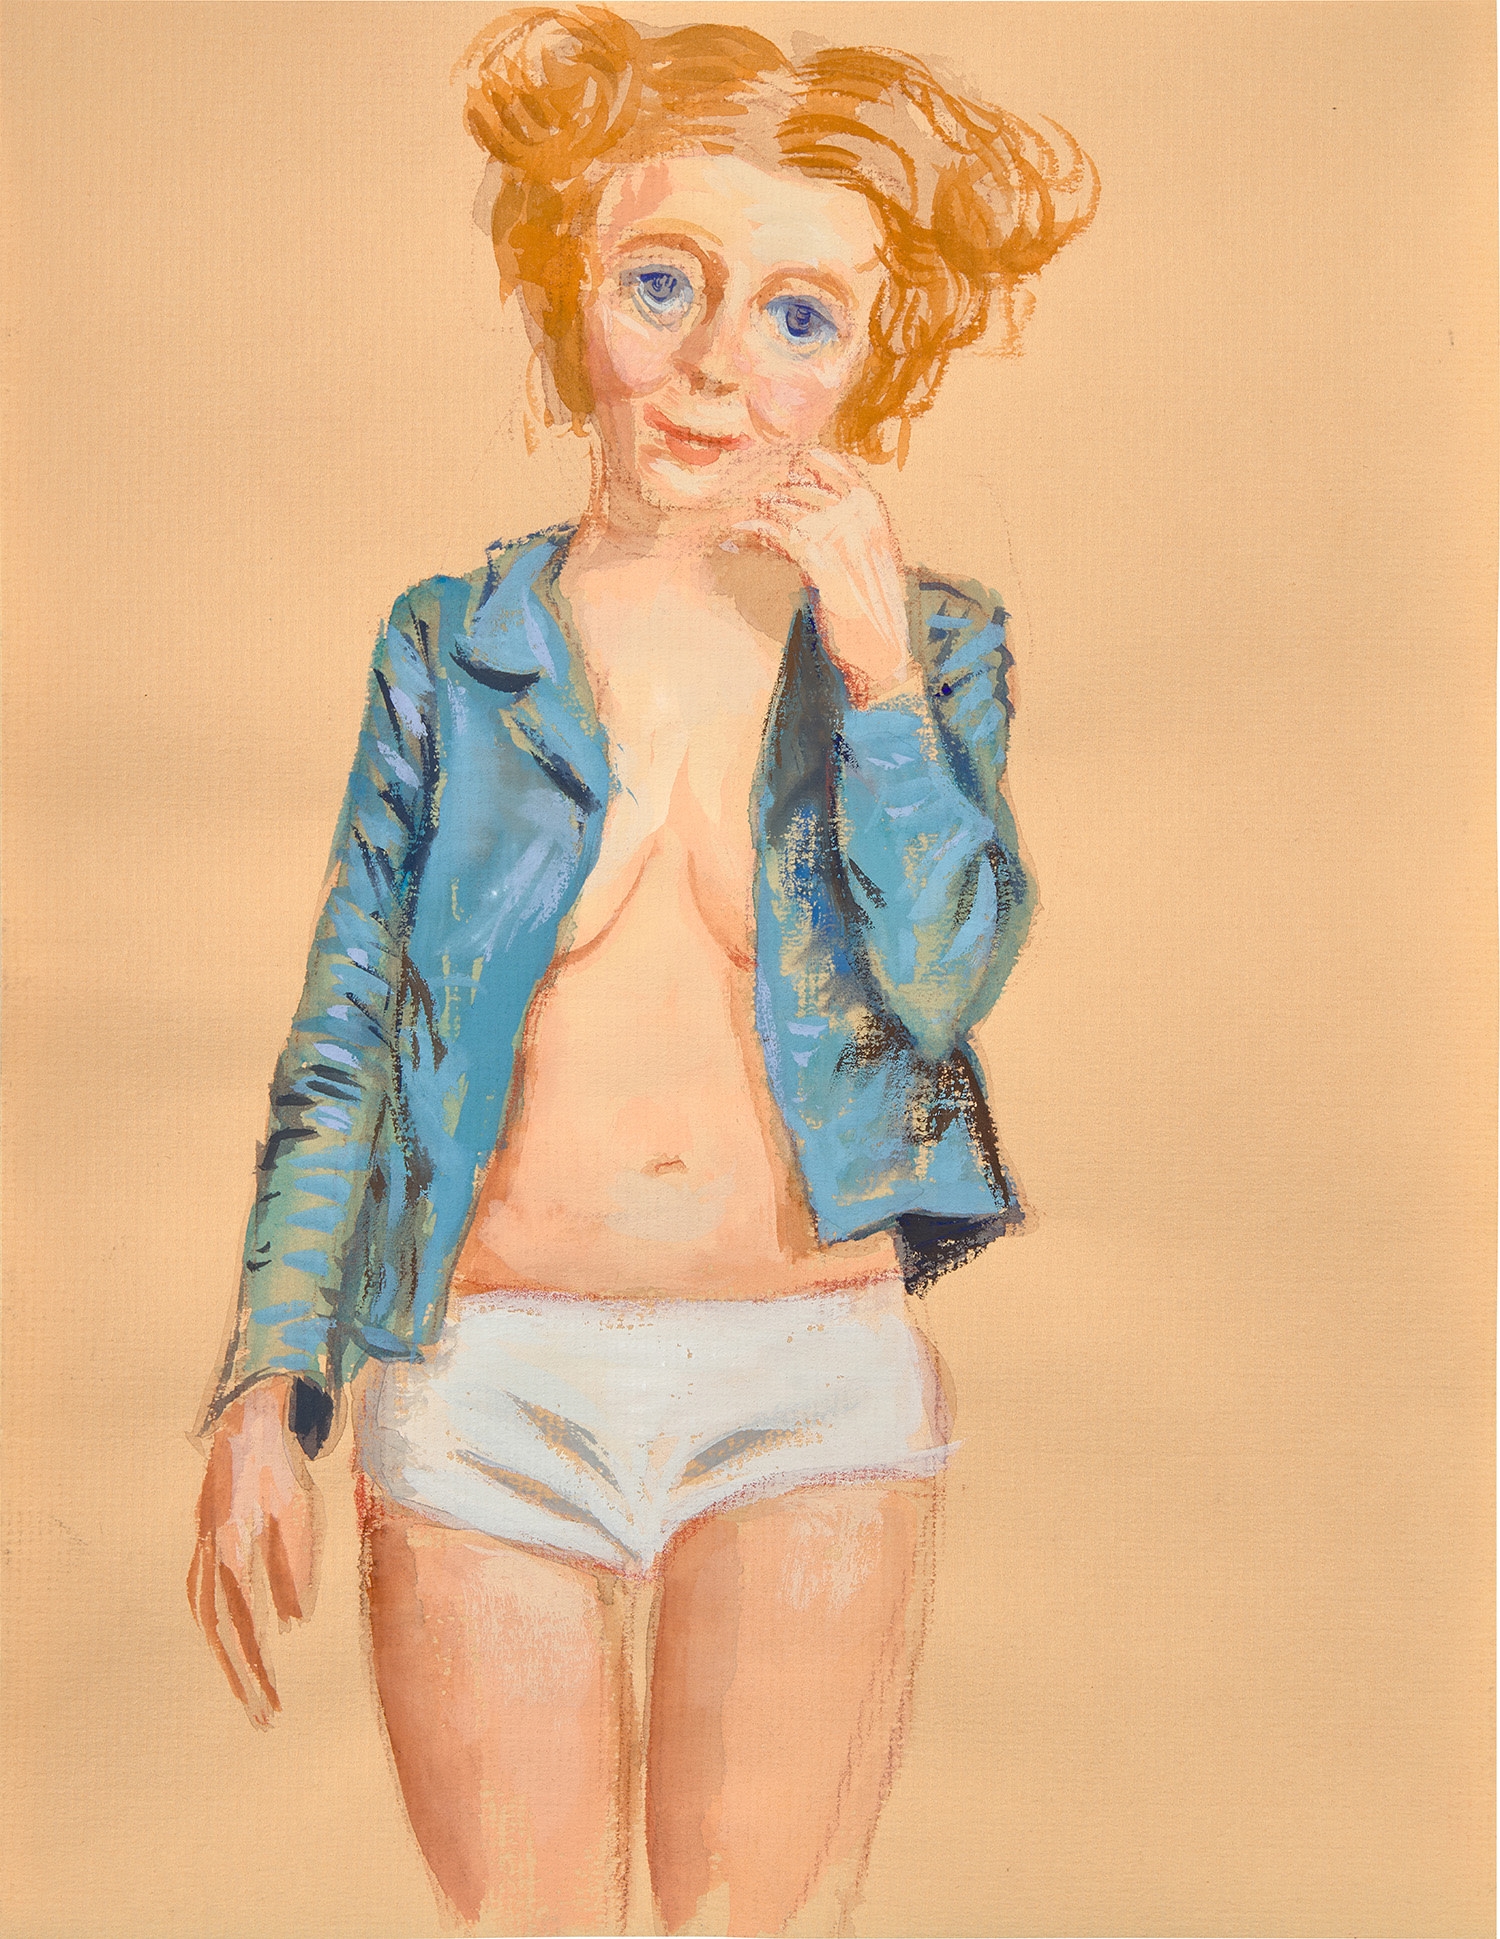 Artwork by John Currin, Sentimental Woman, Made of gouache on paper